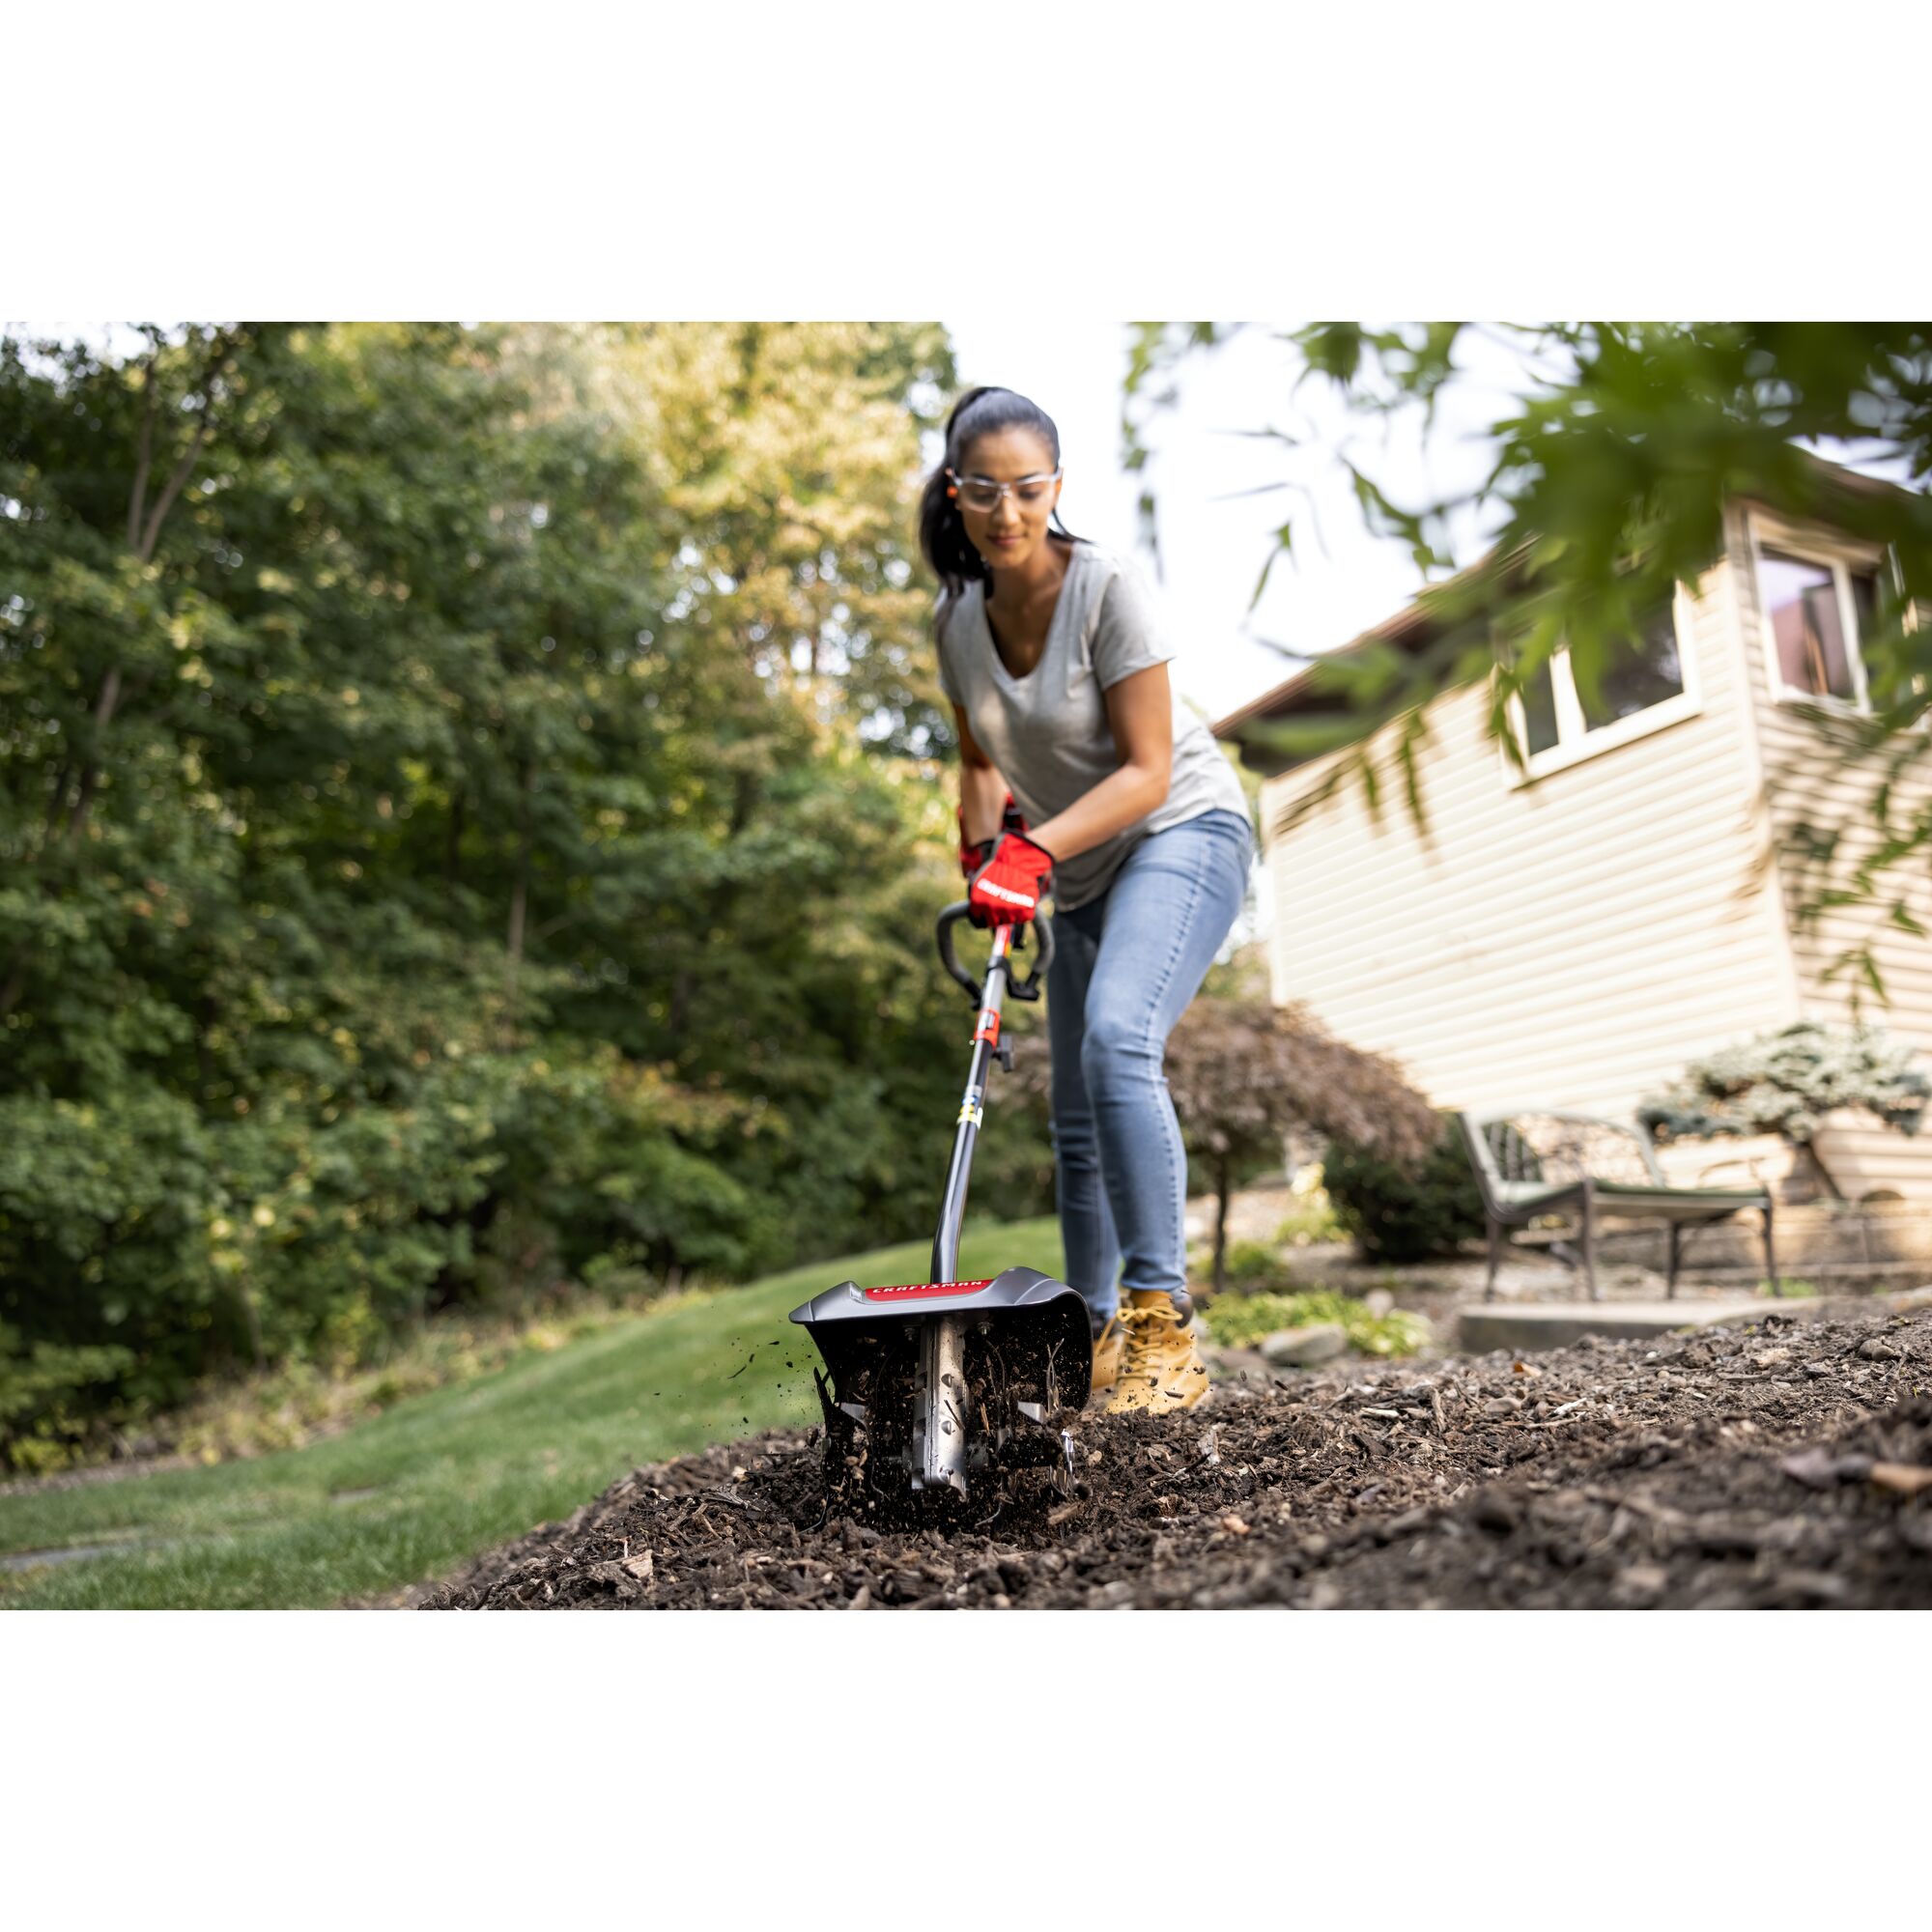 CRAFTSMAN cultivator attachment head in front view tending to mulch in backyard in gray shirt and jeans